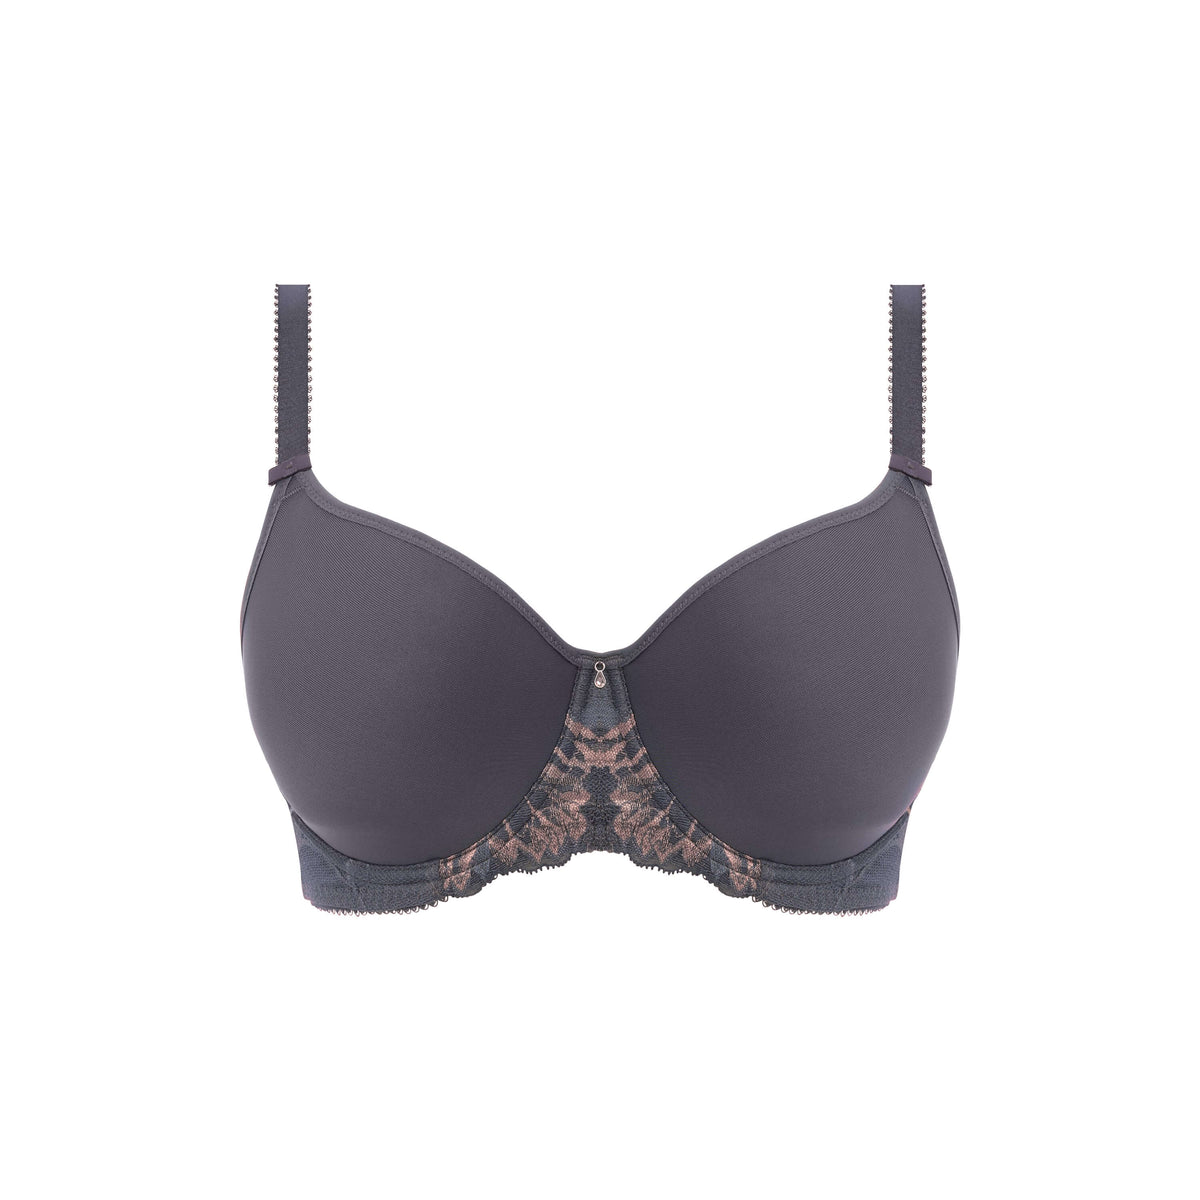 SOUTIEN-GORGE SPACER-AUBREE SHADOW ROSE